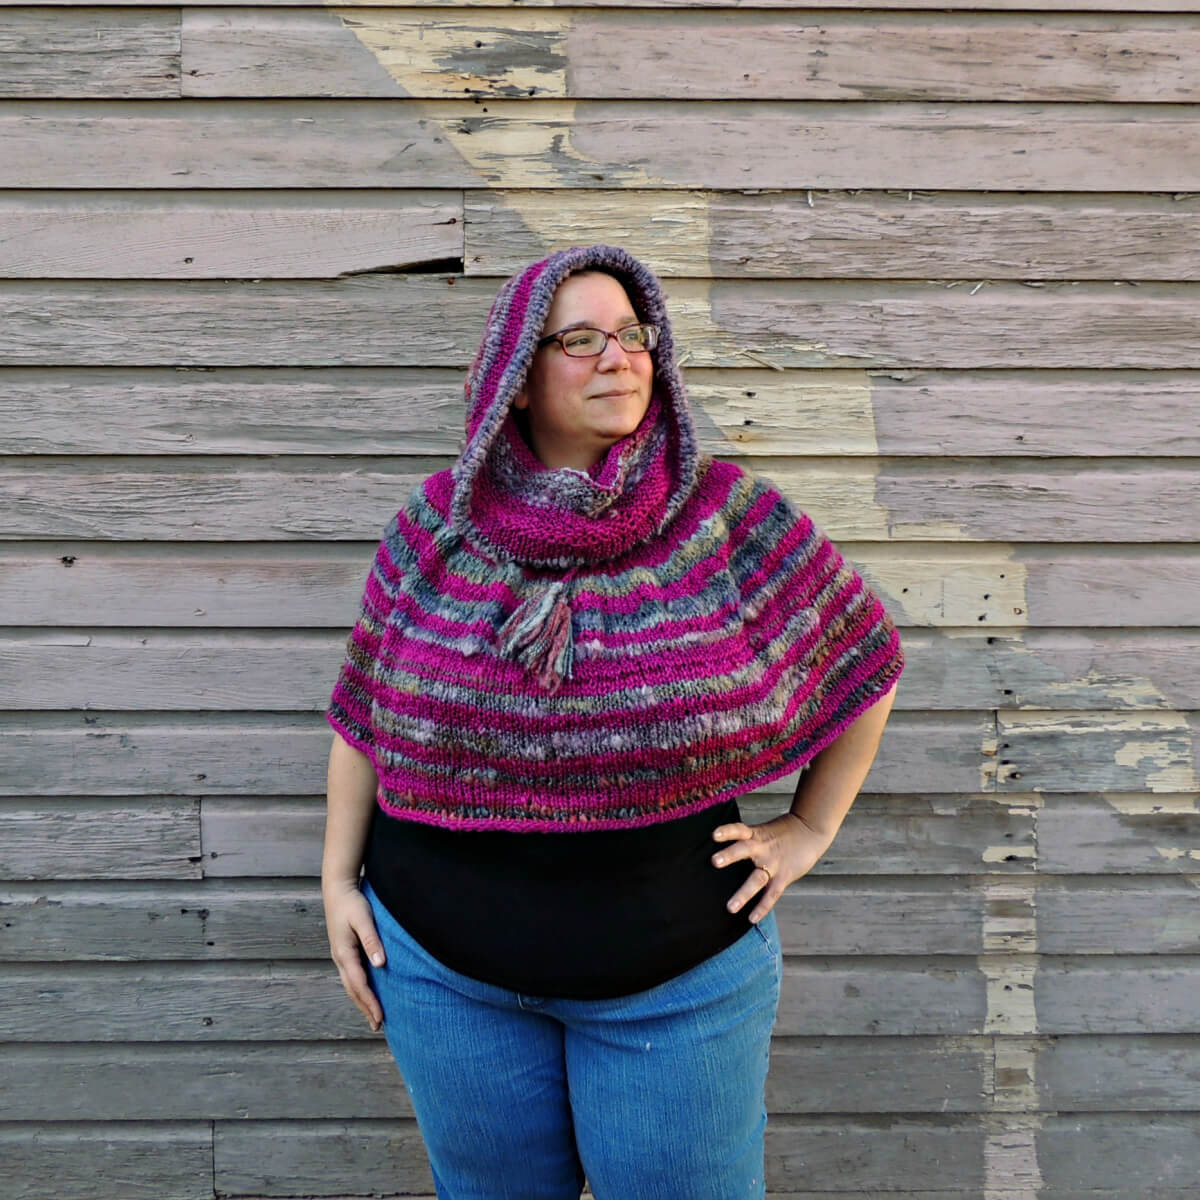 Woman standing in front of a wall with gray wood siding. She wears jeans, a black top and a tube shaped poncho with a drawstring about 1/3 down to create a hood above the drawstring and an elbow-length poncho below. The poncho is knit in yarn that that stripes between a thick and thin fuchsia and a fuzzy gray. The hood is pulled up on her head, and one hand is on her hip.